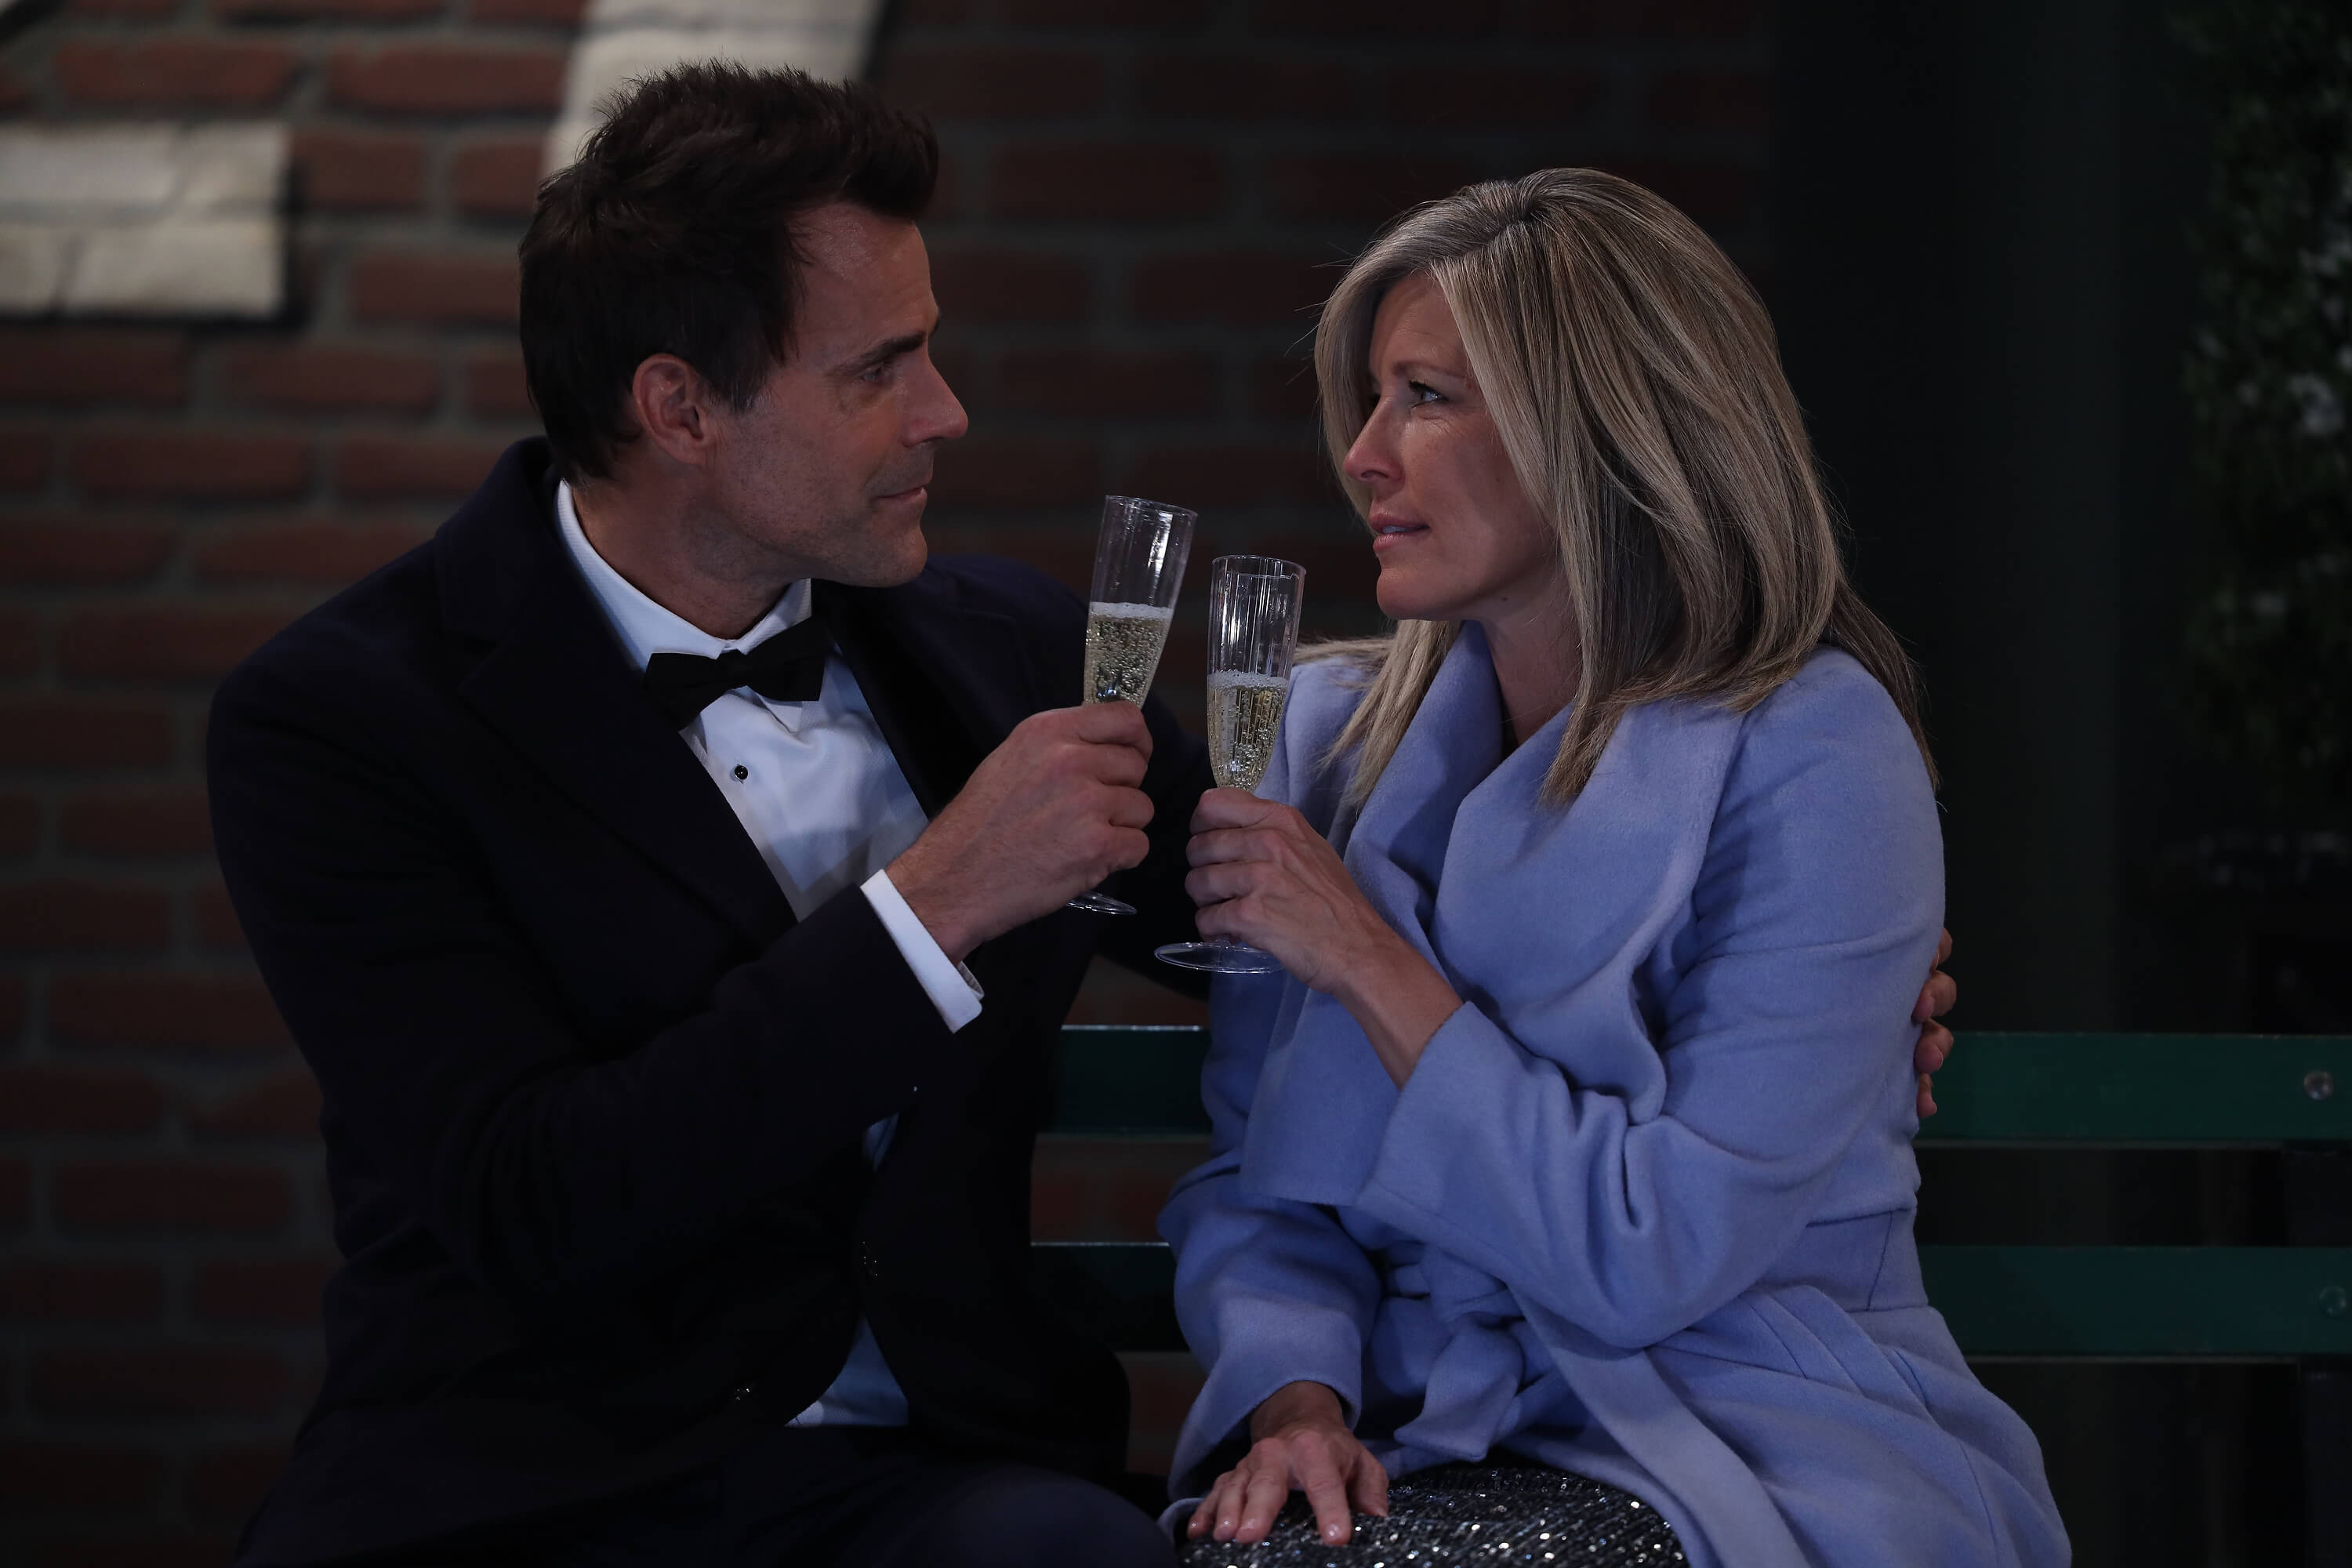 'General Hospital' stars Cameron Mathison and Laura Wright sitting on a bench in a scene from the soap opera.